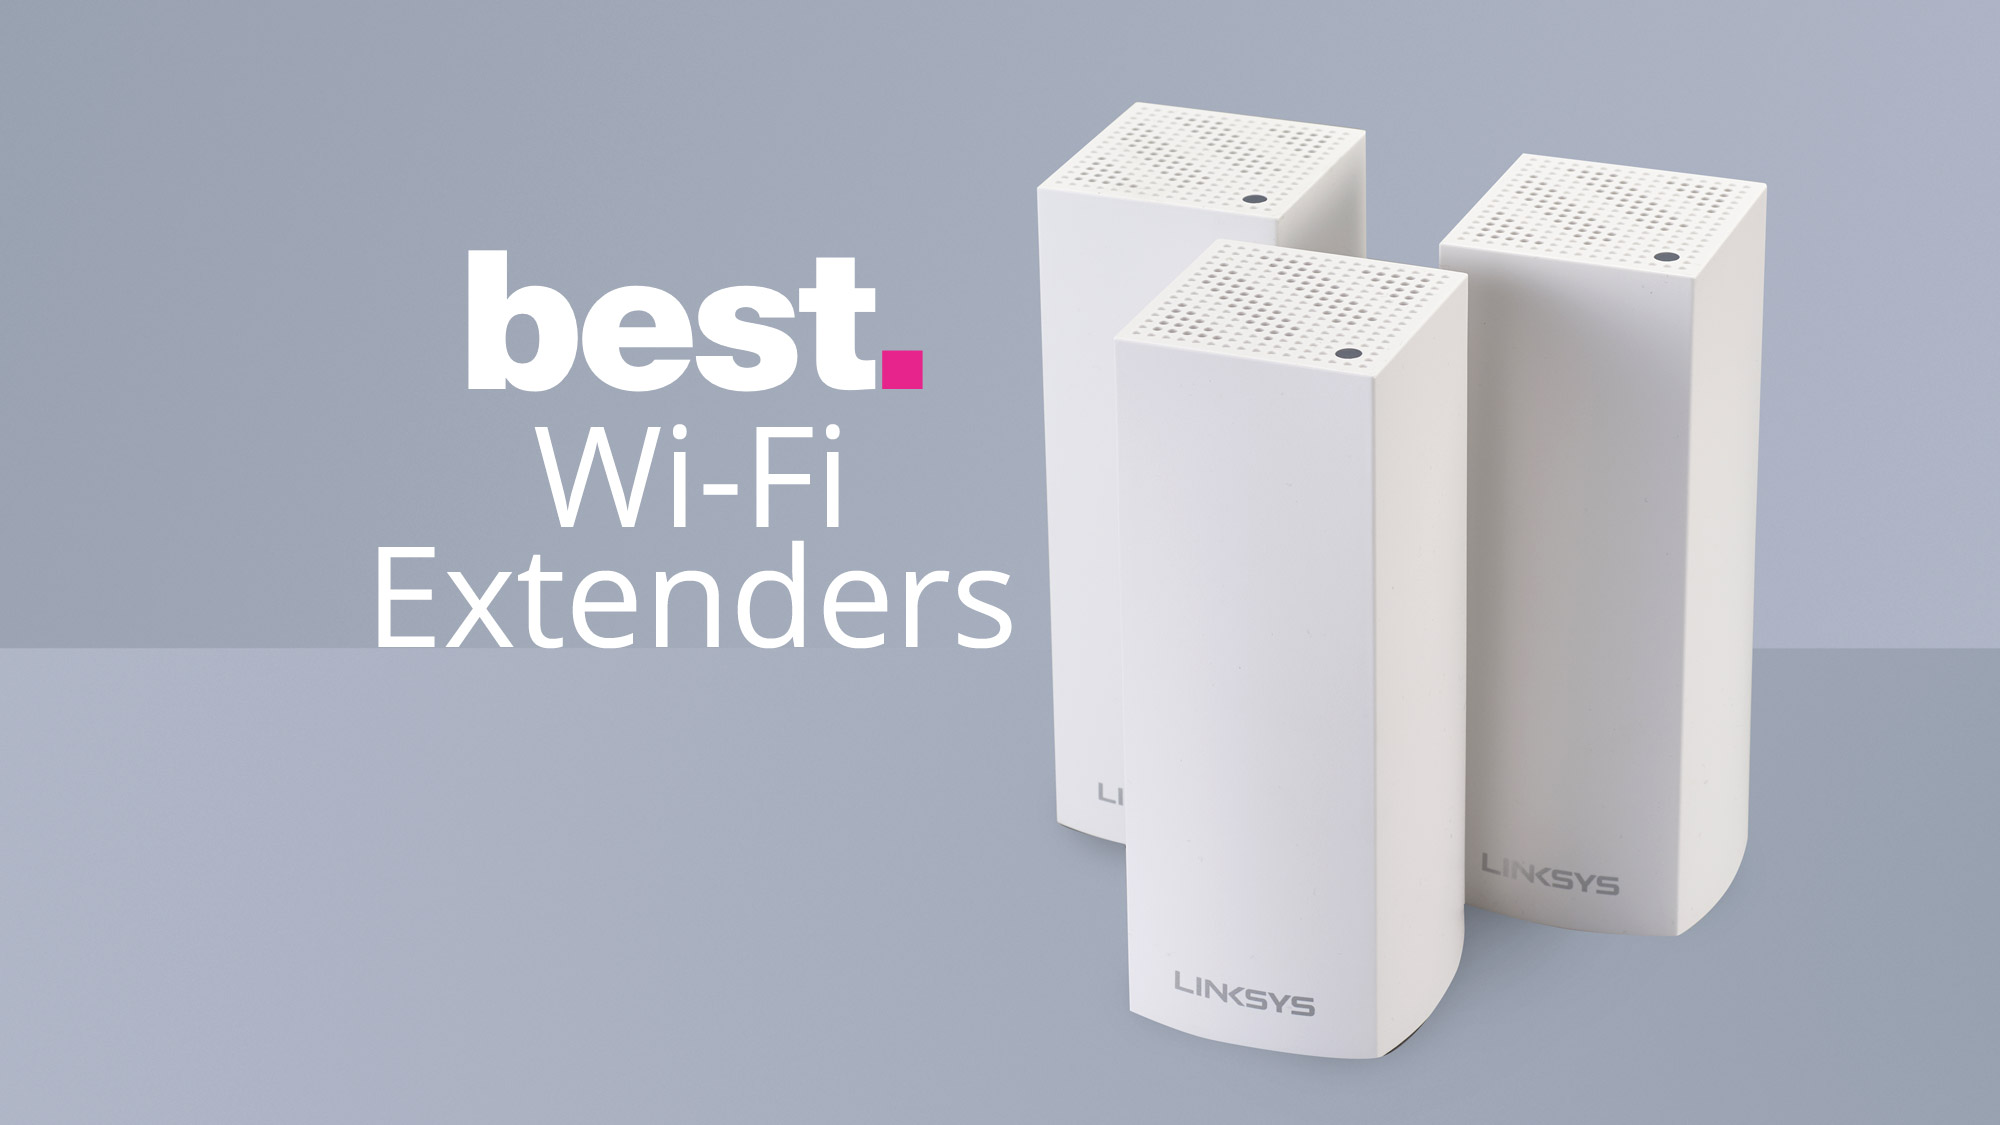 the best wifi boosters